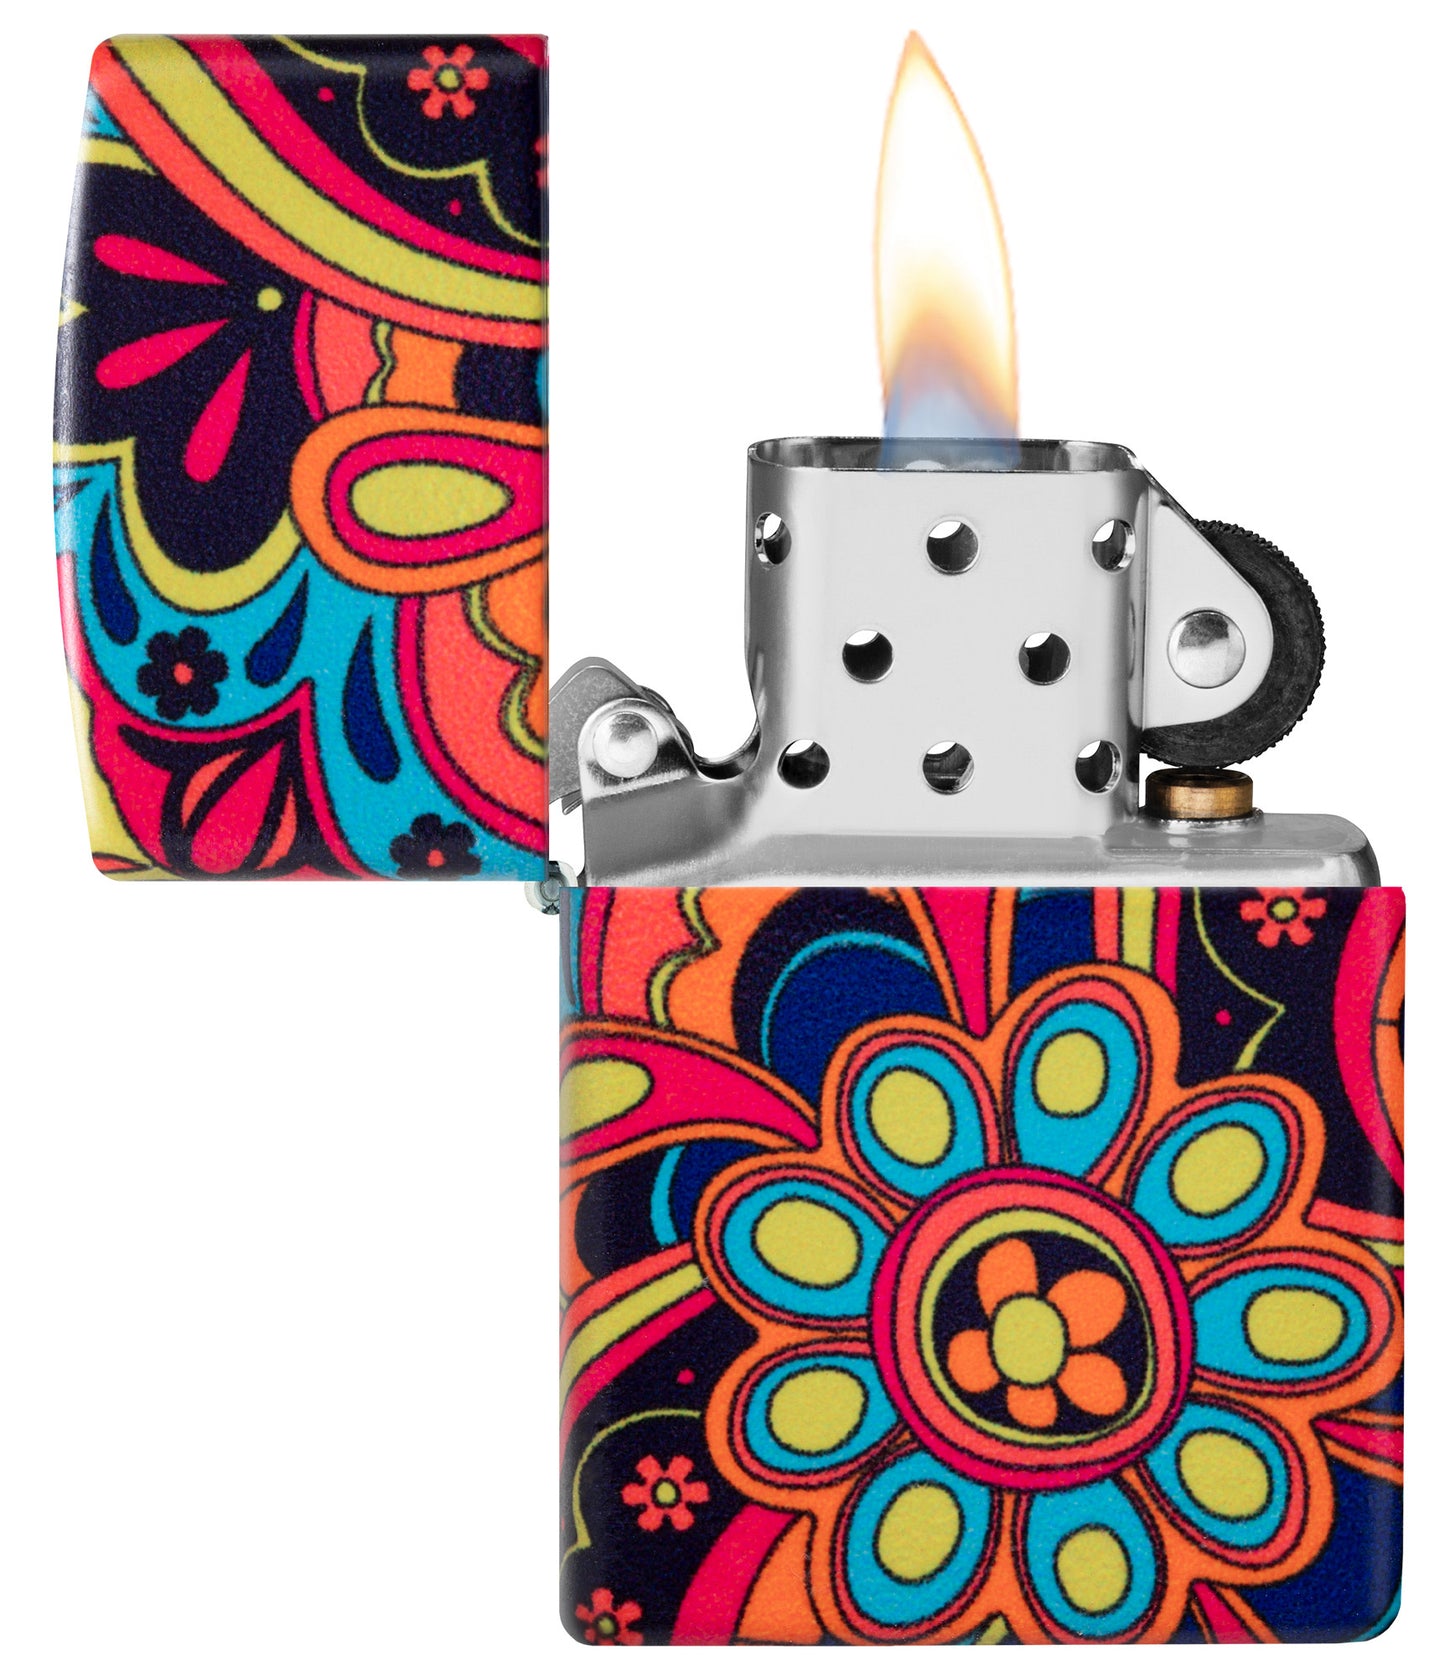 Zippo Flower Power Design 540 Matte Windproof Lighter with its lid open and lit.